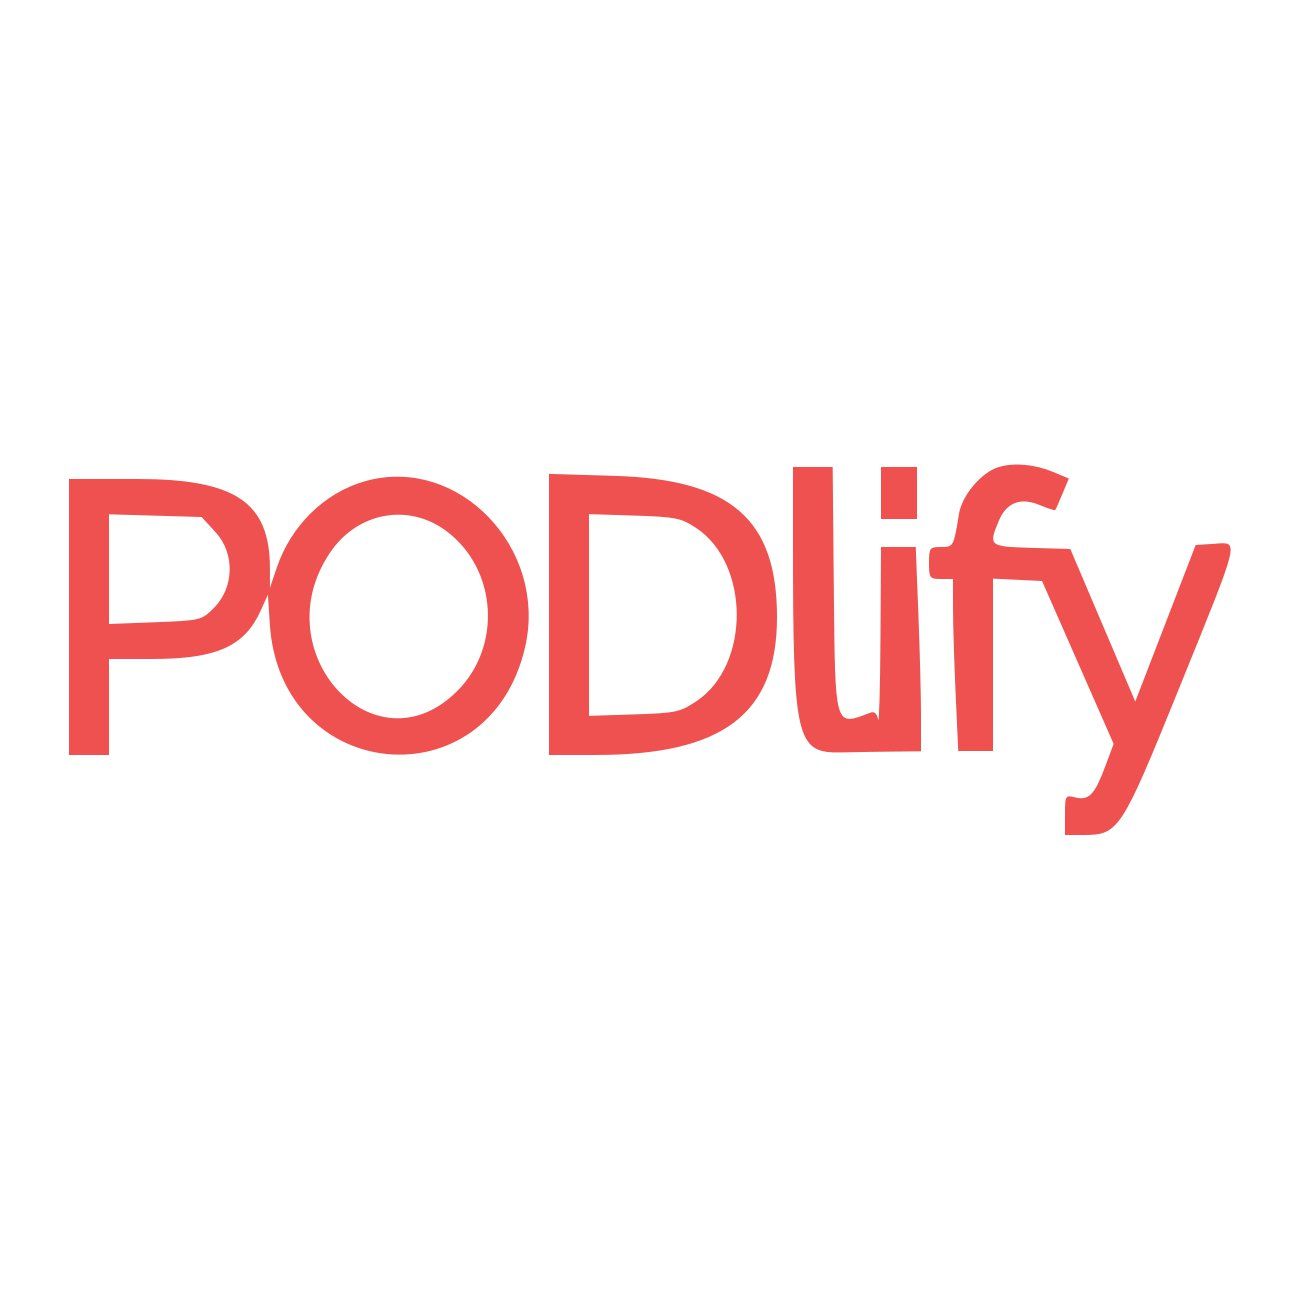 Sell Photos Online with Podlify